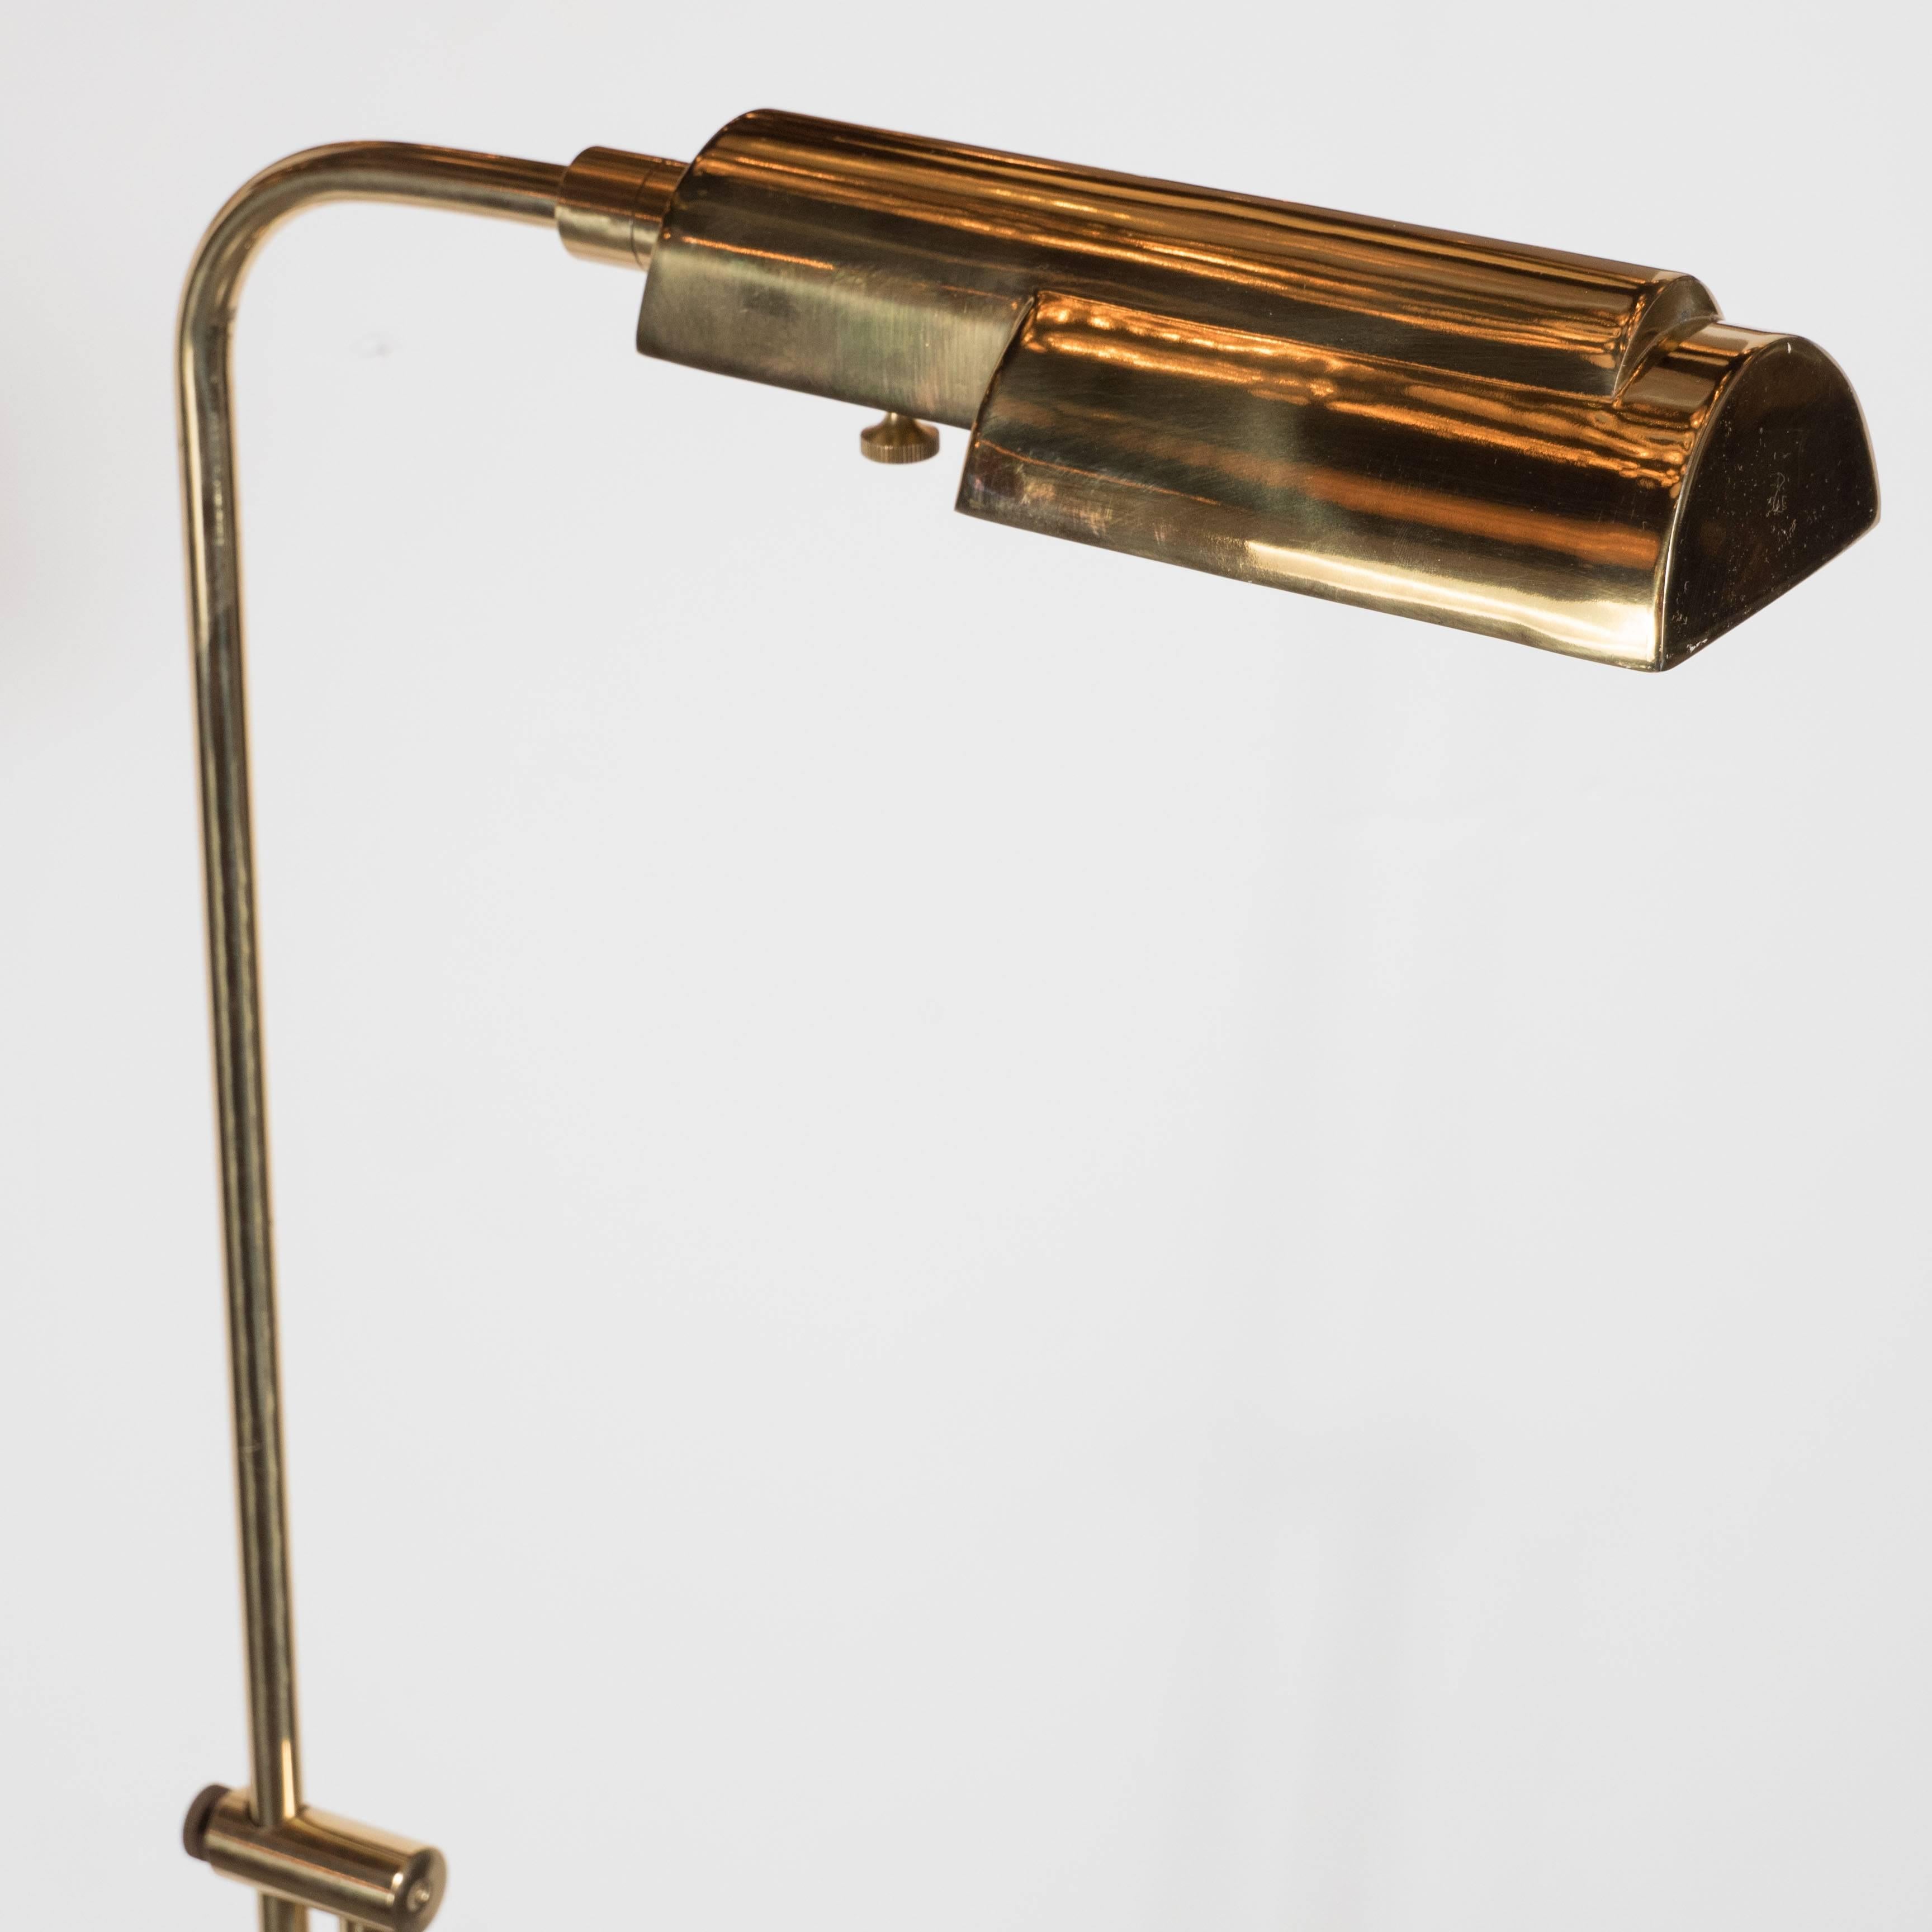 A Mid-Century Modernist brass adjustable floor lamp, this elegantly shaped extendable floor lamp attractively mounted on a circular brass base and sporting a charming hangover shade also made out of brass with the ability to swivel into various